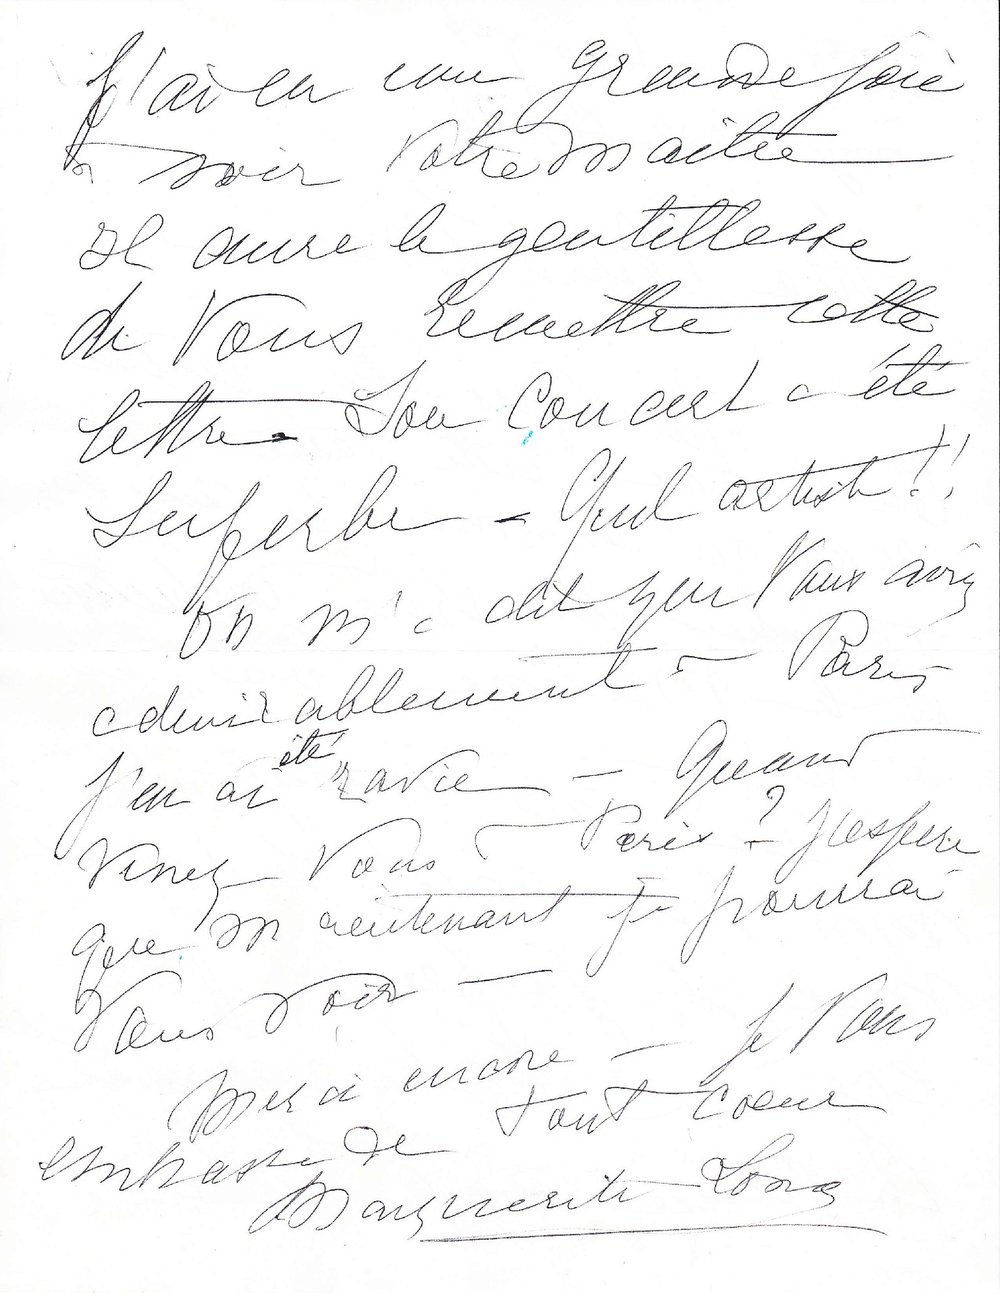 Letter from Marguerite Long to Mdivani (second page)